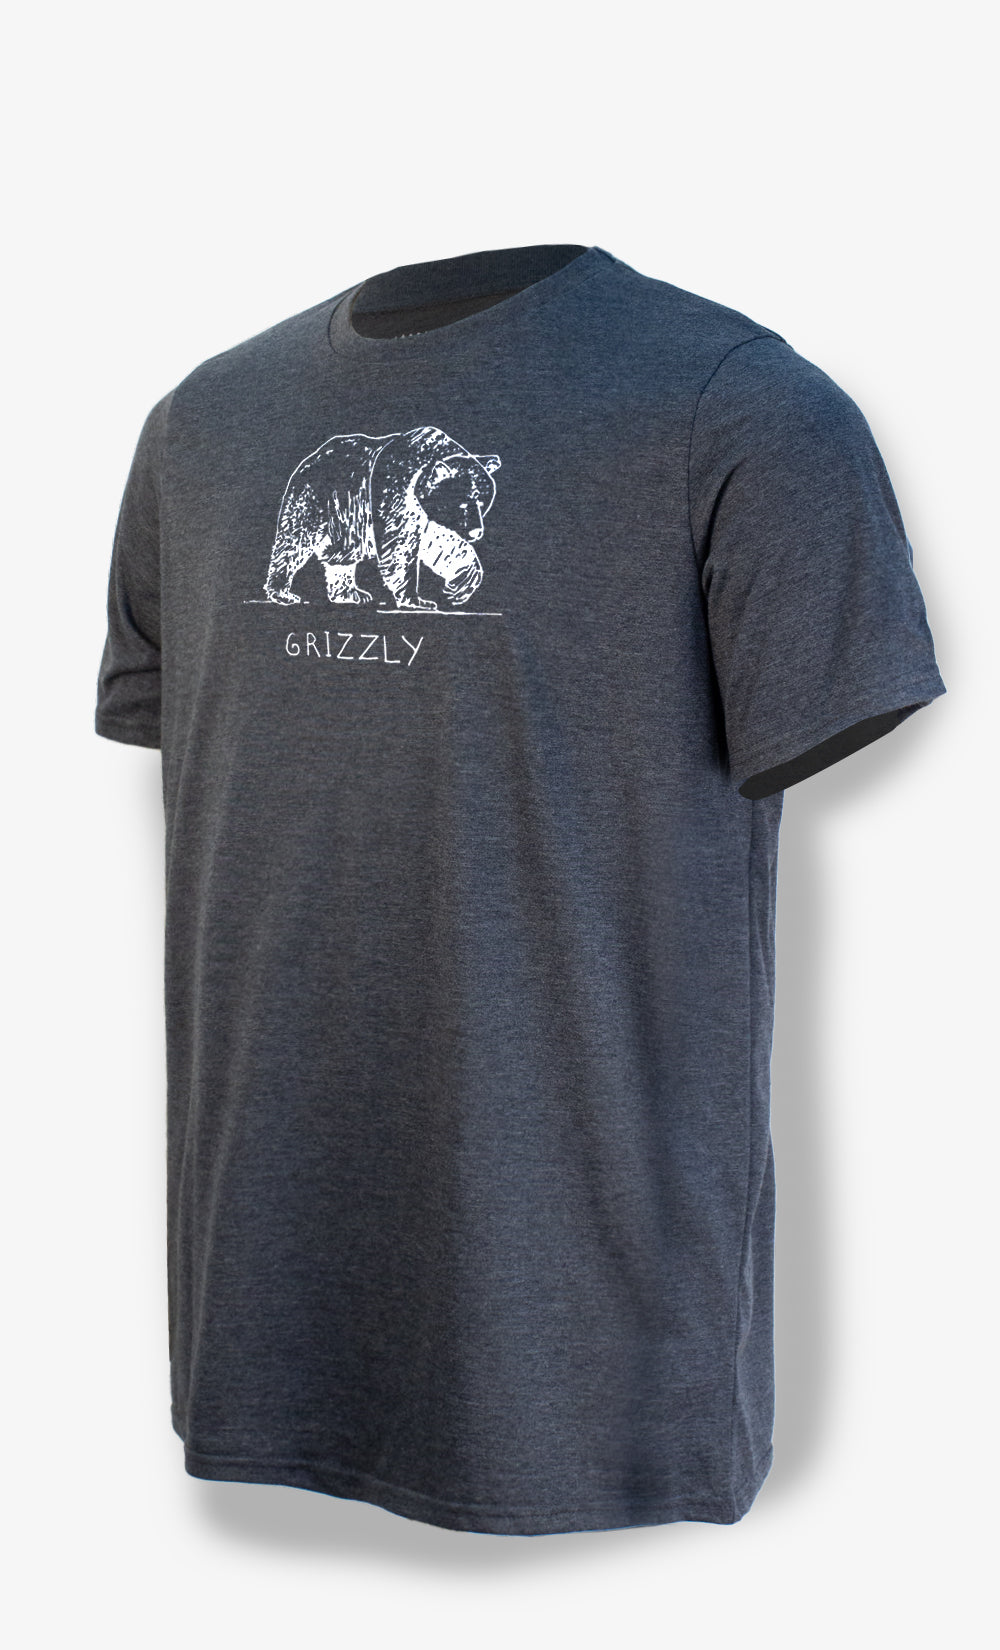 Charcoal Men's T-Shirt - Grizzly